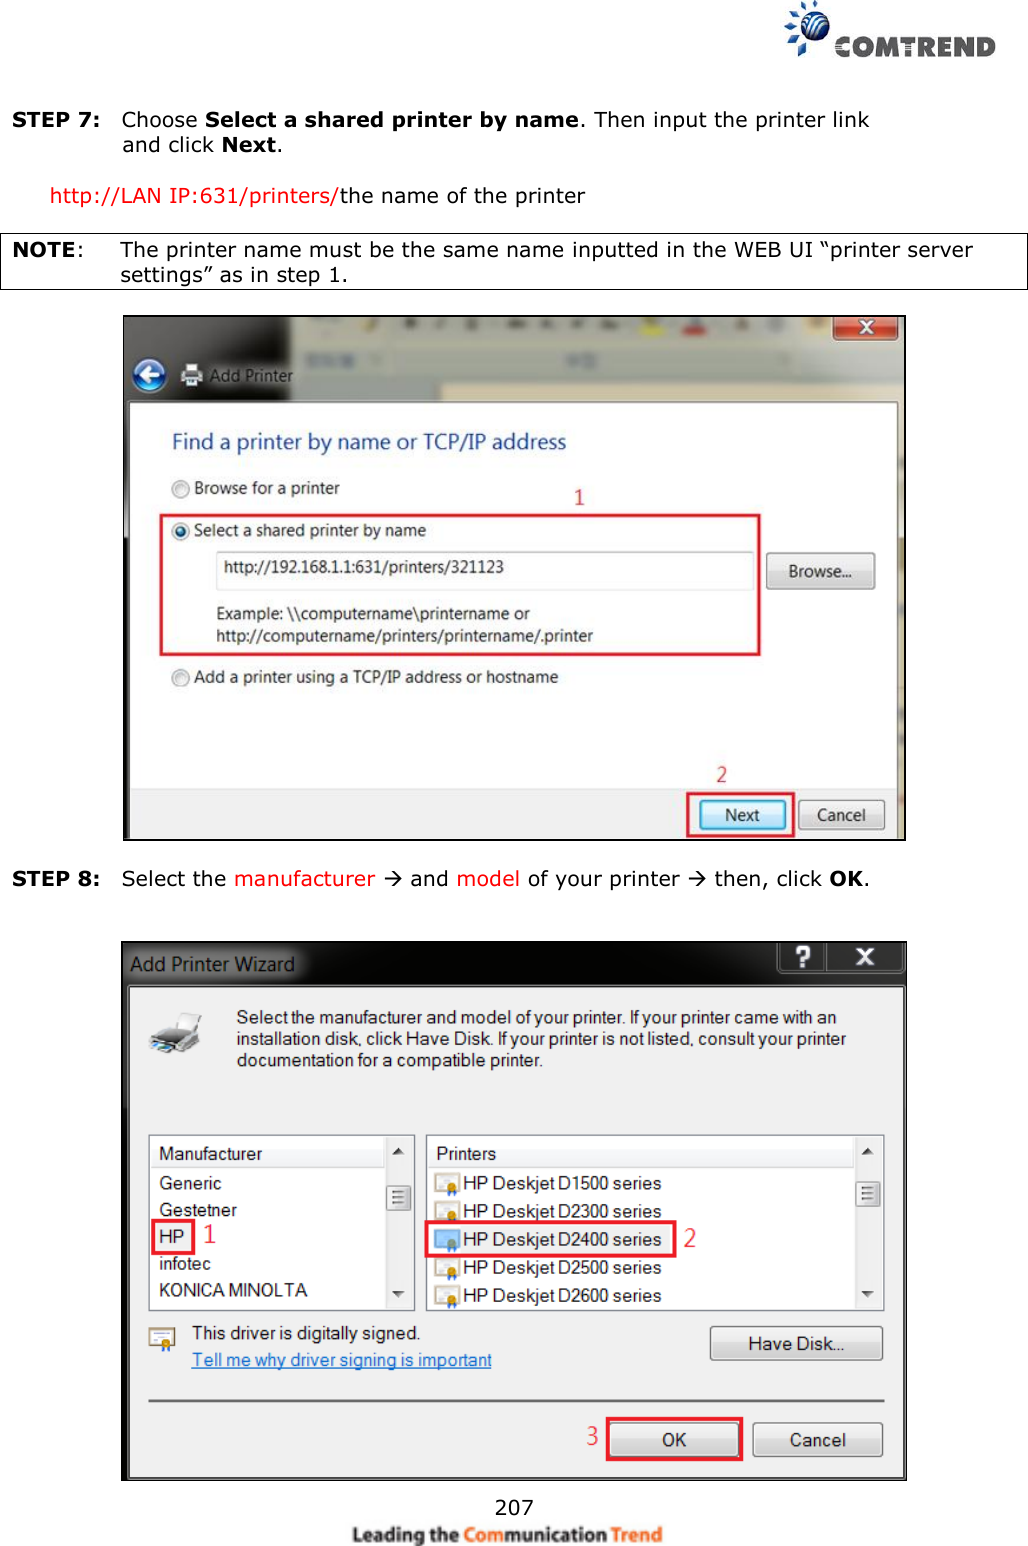     207  STEP 7:    Choose Select a shared printer by name. Then input the printer link     and click Next.      http://LAN IP:631/printers/the name of the printer  NOTE:    The printer name must be the same name inputted in the WEB UI “printer server settings” as in step 1.    STEP 8:    Select the manufacturer  and model of your printer  then, click OK.   